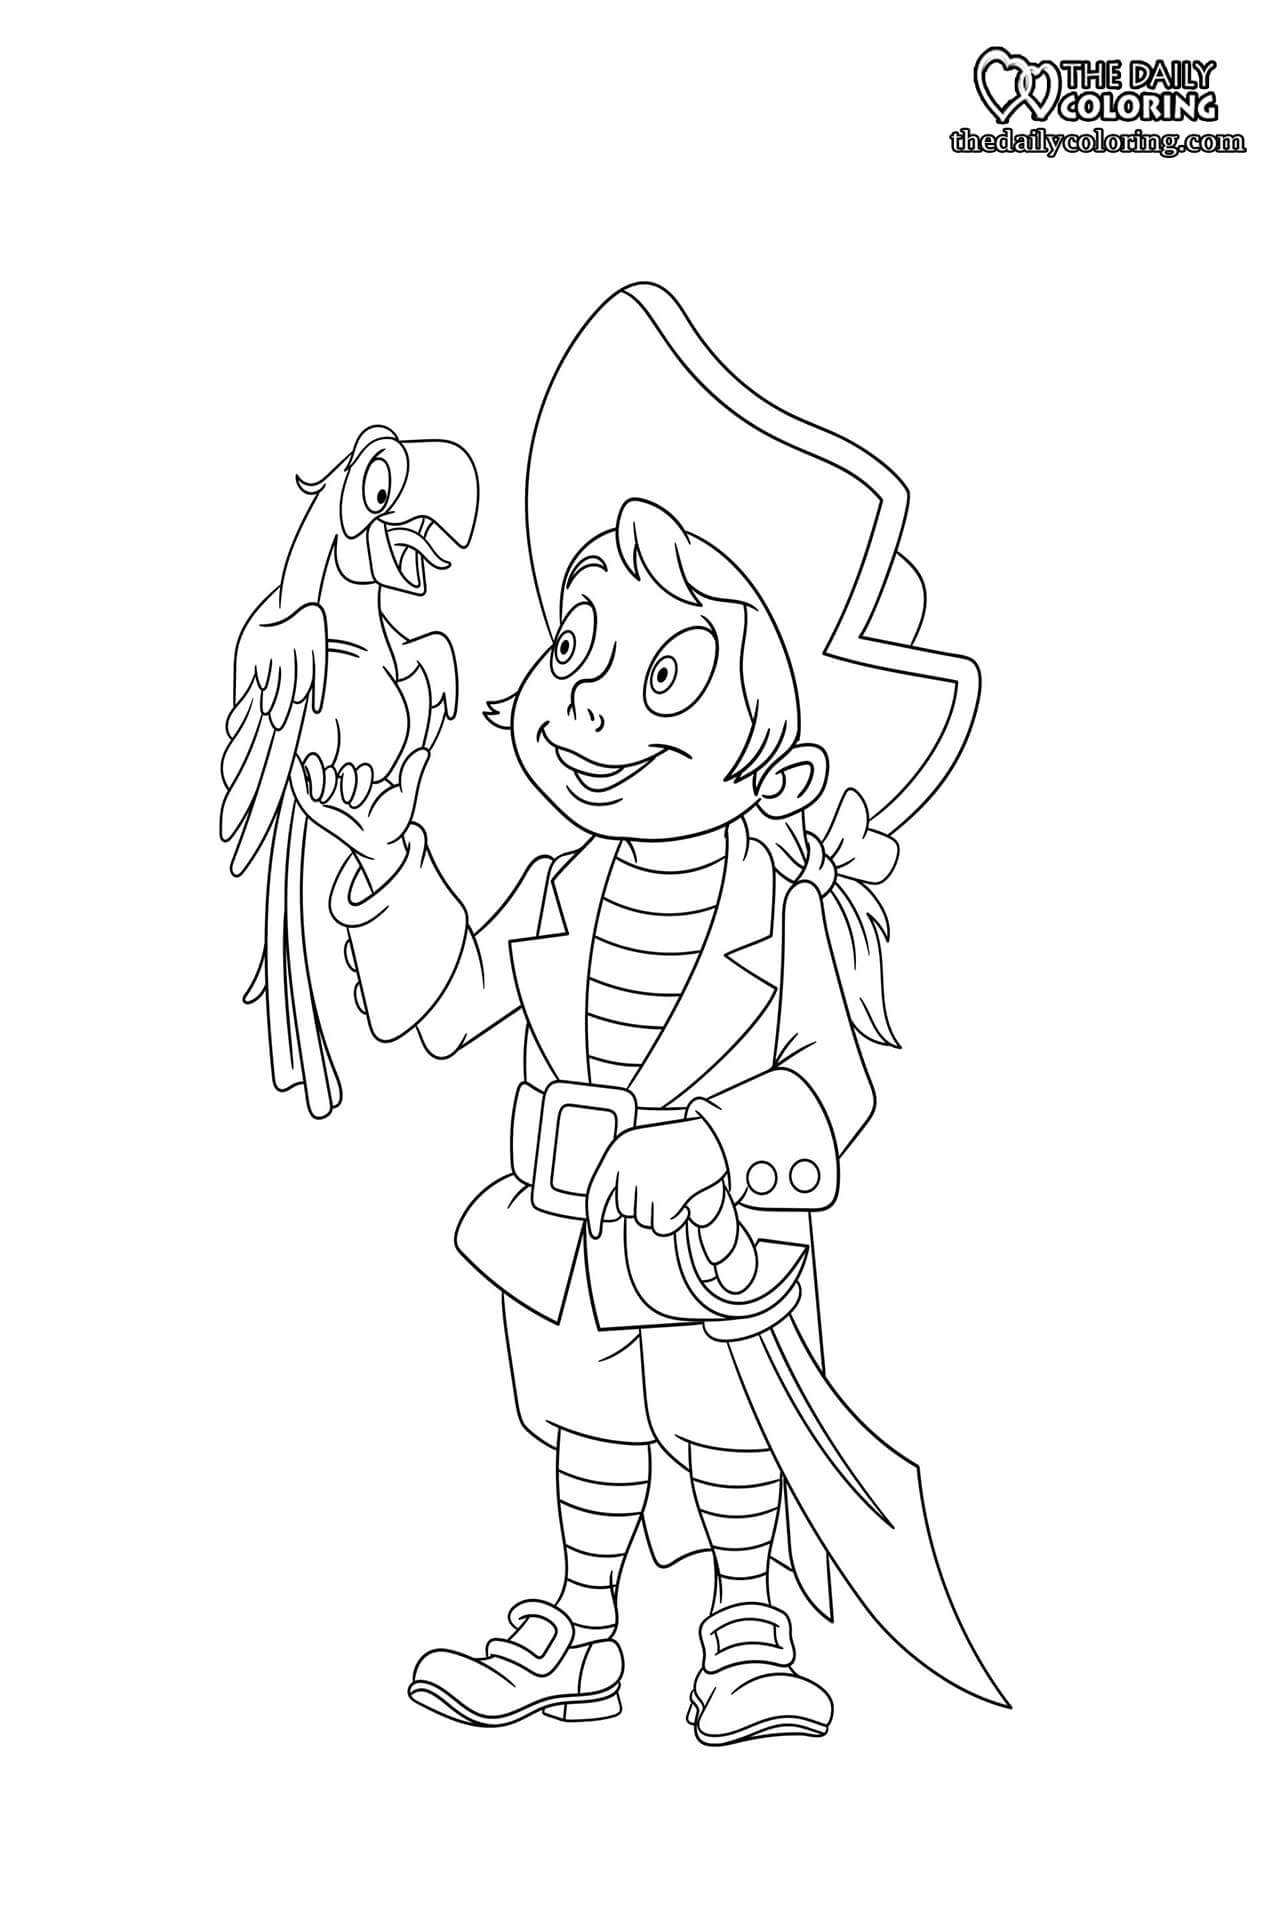 pirate-and-parrot-coloring-page